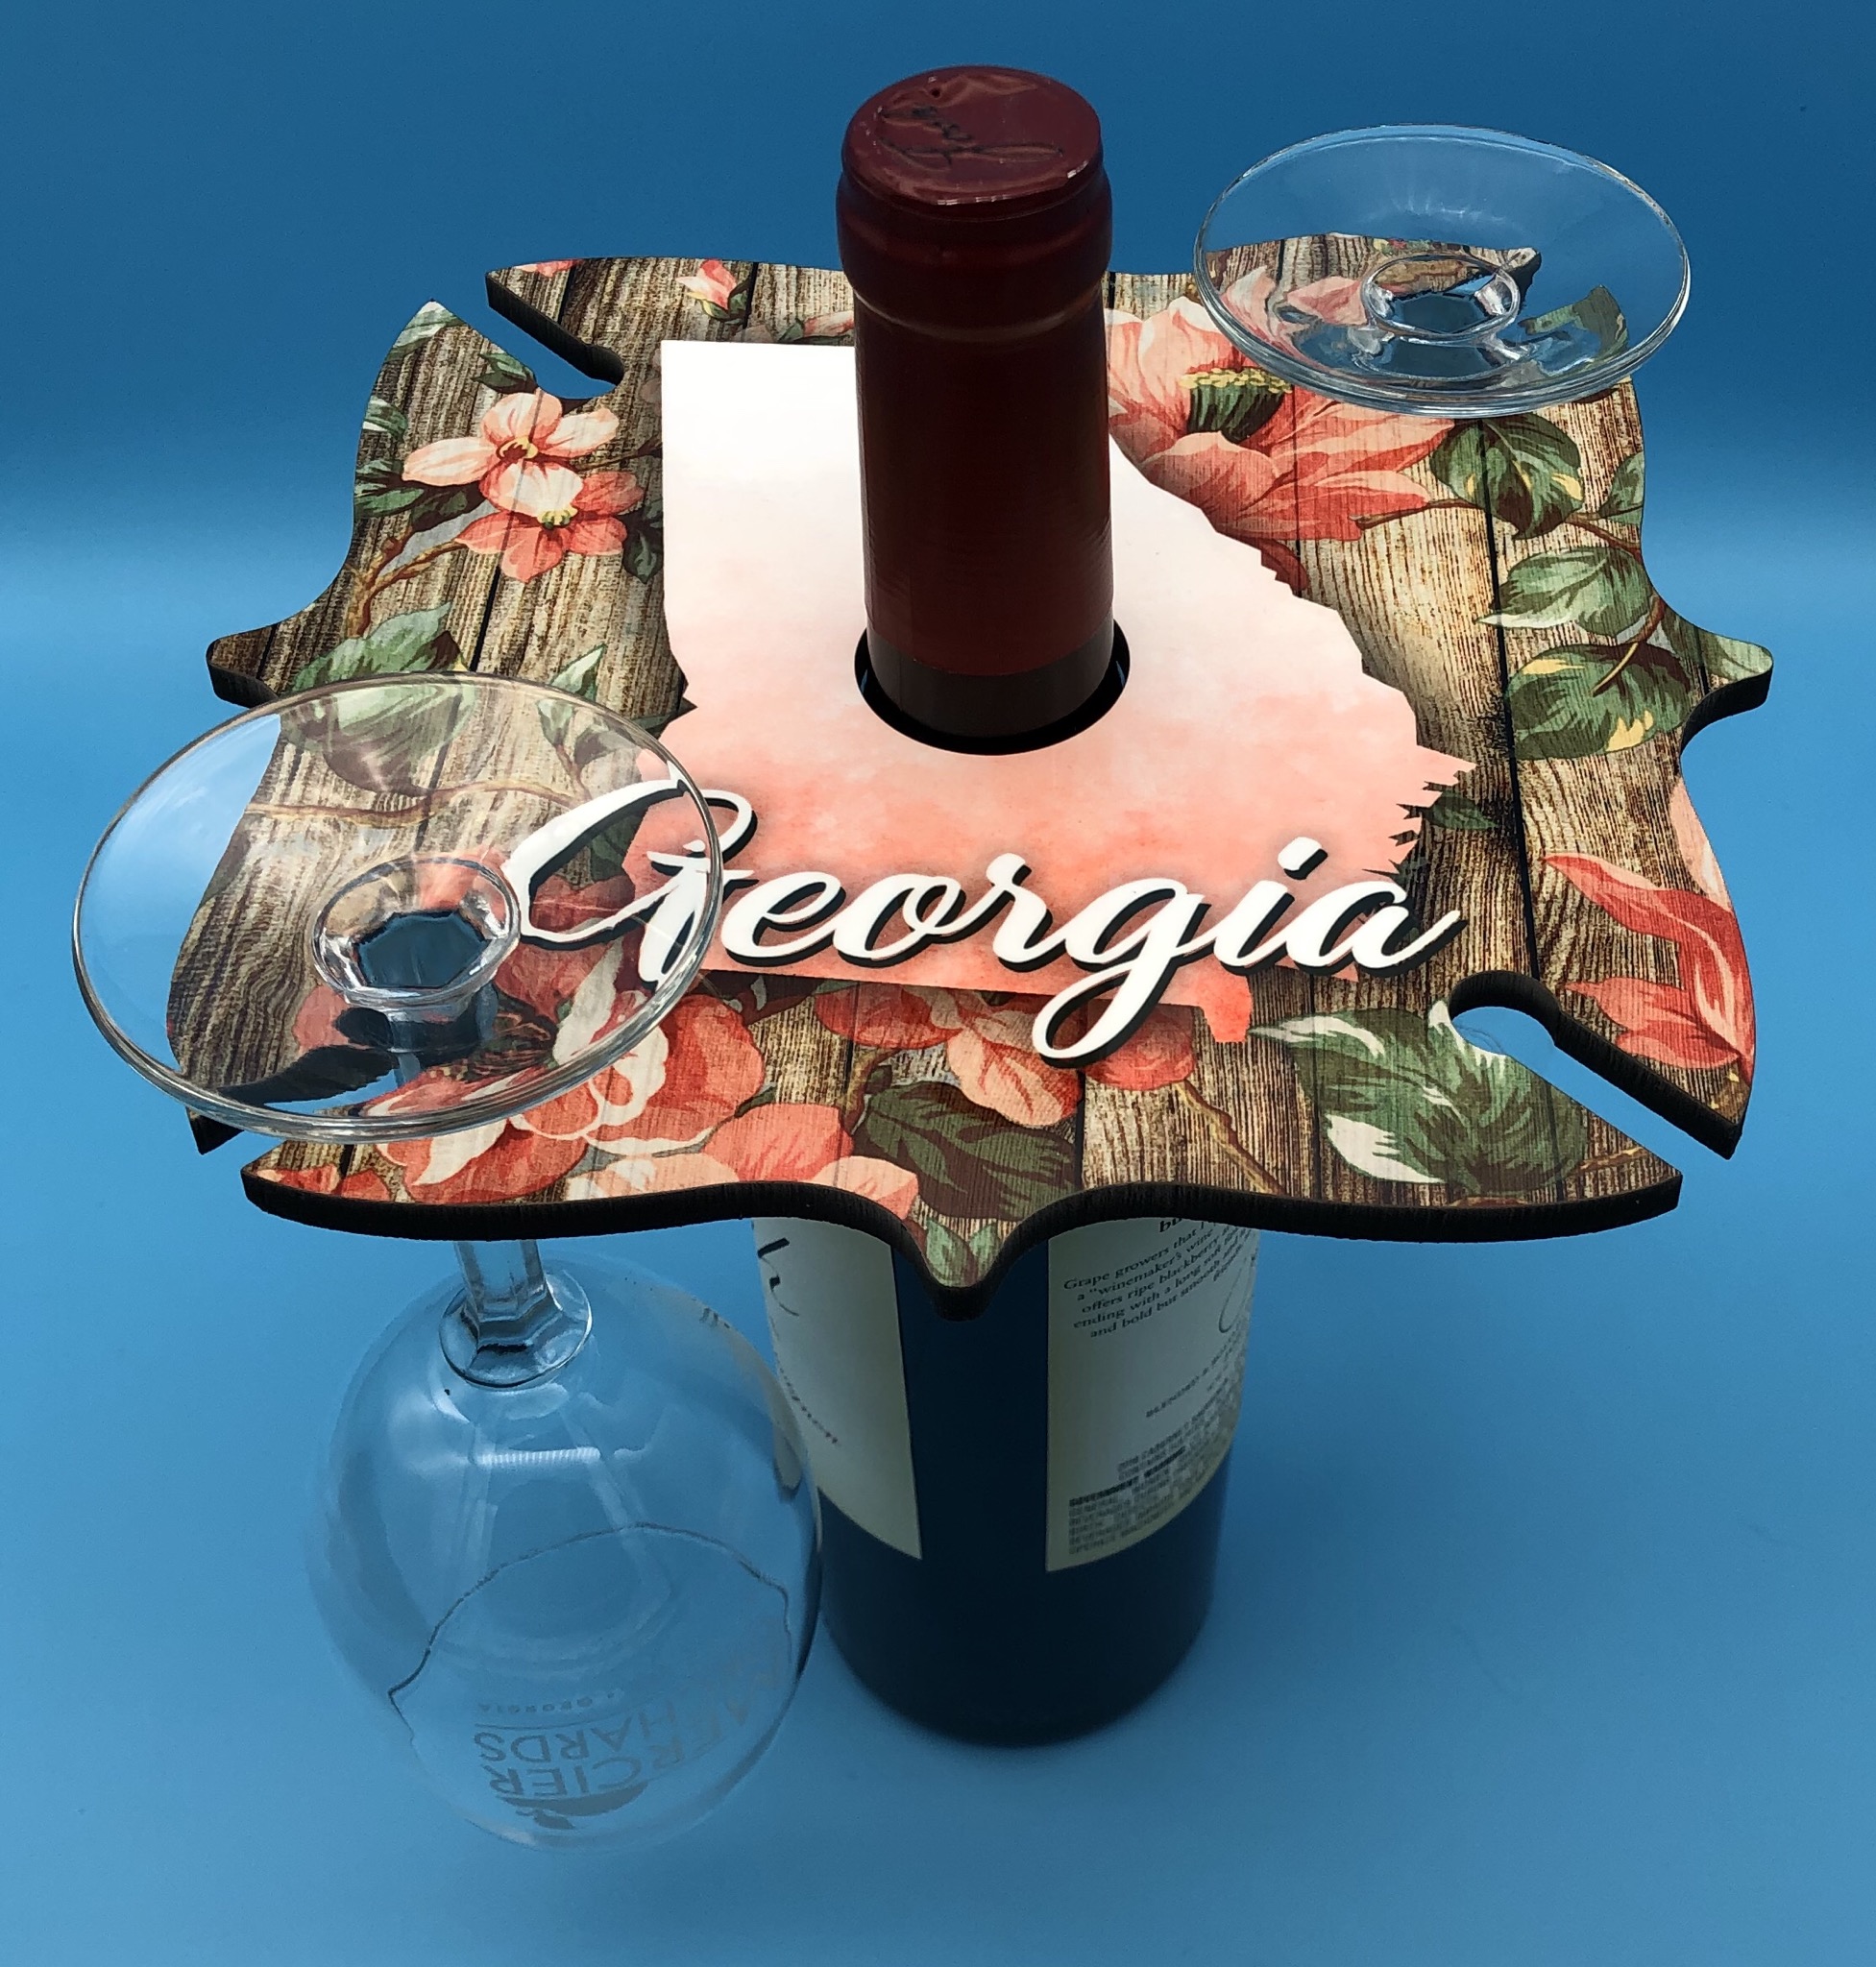 Wine Caddy made with sublimation printing